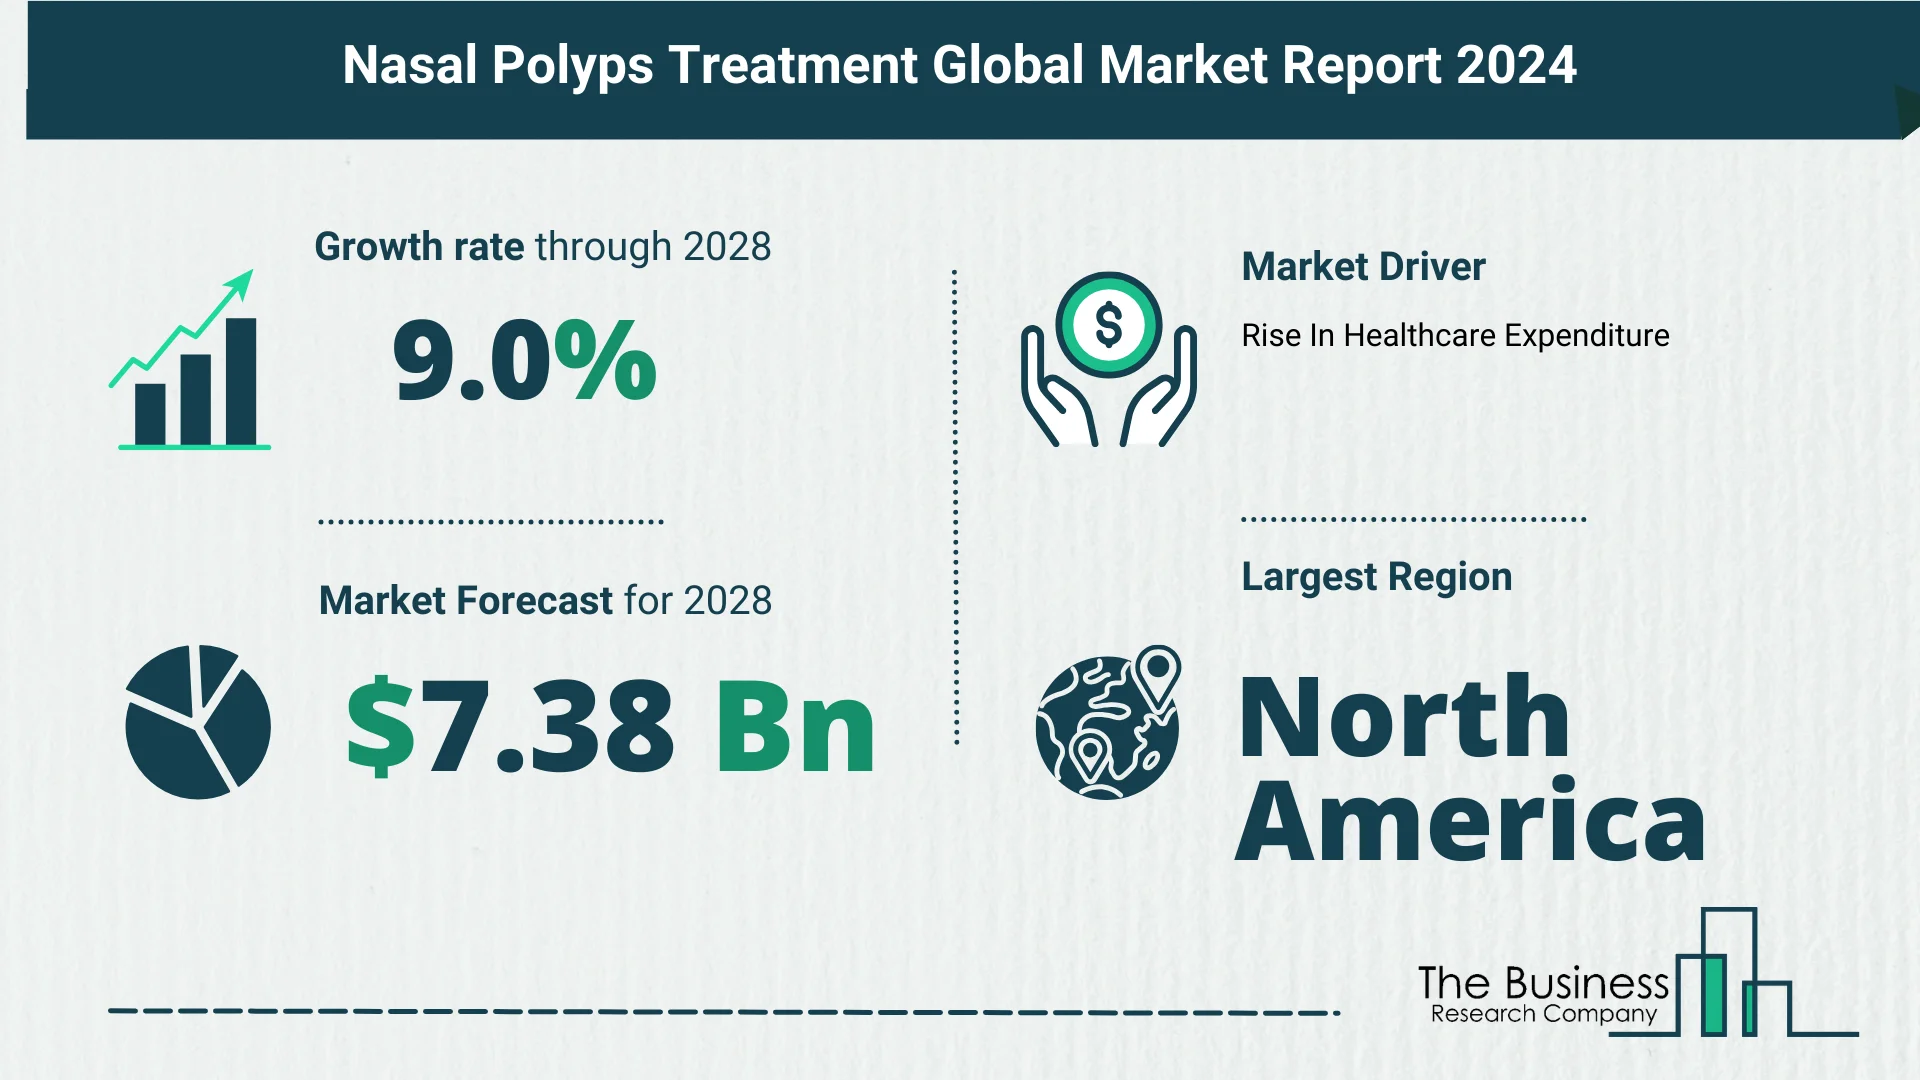 Global Nasal Polyps Treatment Market Analysis: Estimated Market Size And Growth Rate